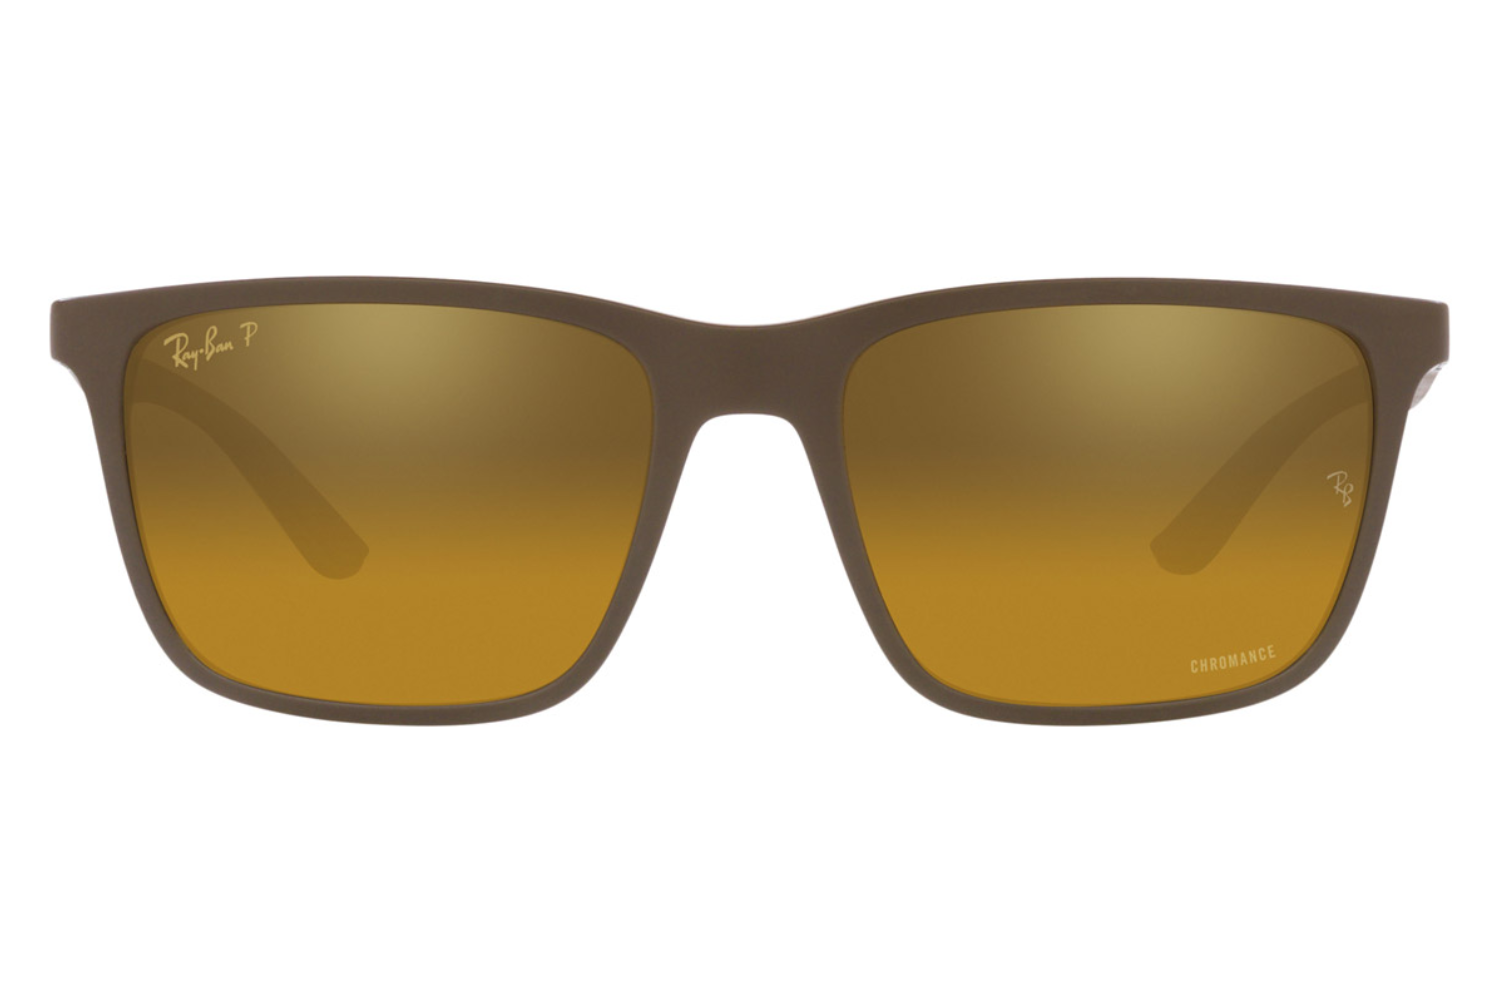 NEW WAYFARER CLASSIC Sunglasses in Black and Blue - RB2132 | Ray-Ban® US